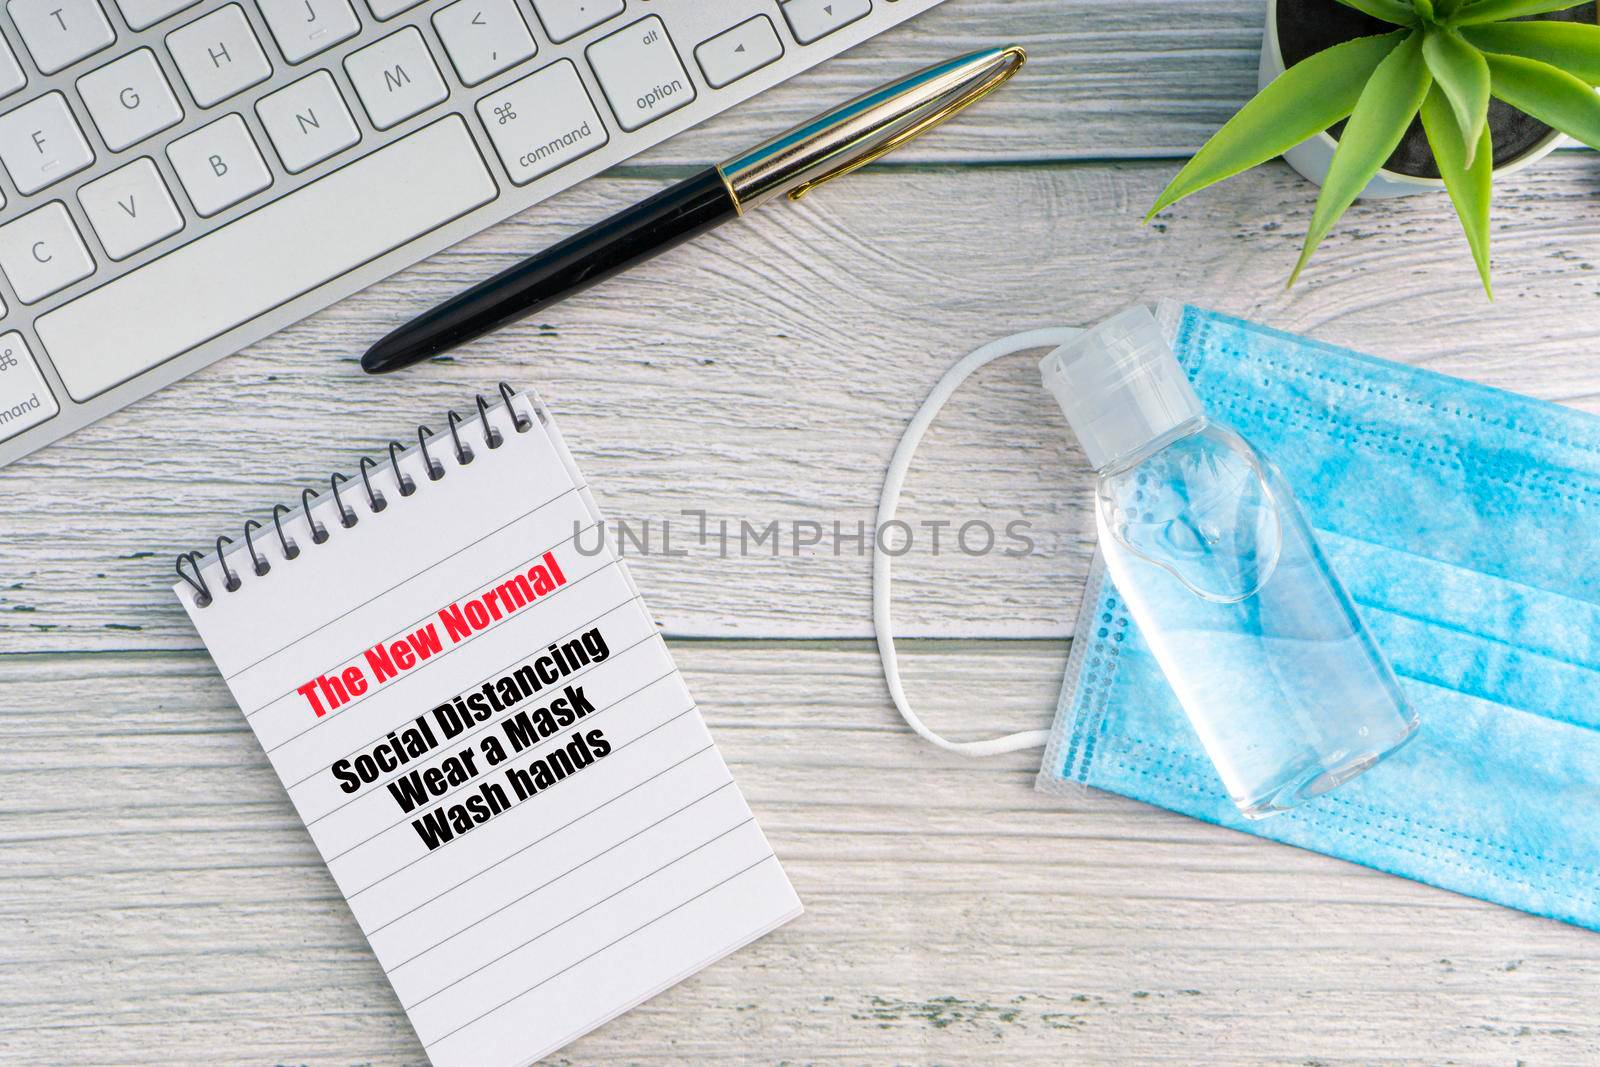 THE NEW NORMAL text with notebook, safety face mask, keyboard, fountain pen, hand sanitizer and decorative plant on wooden background. Covid 19 and coronavirus concept